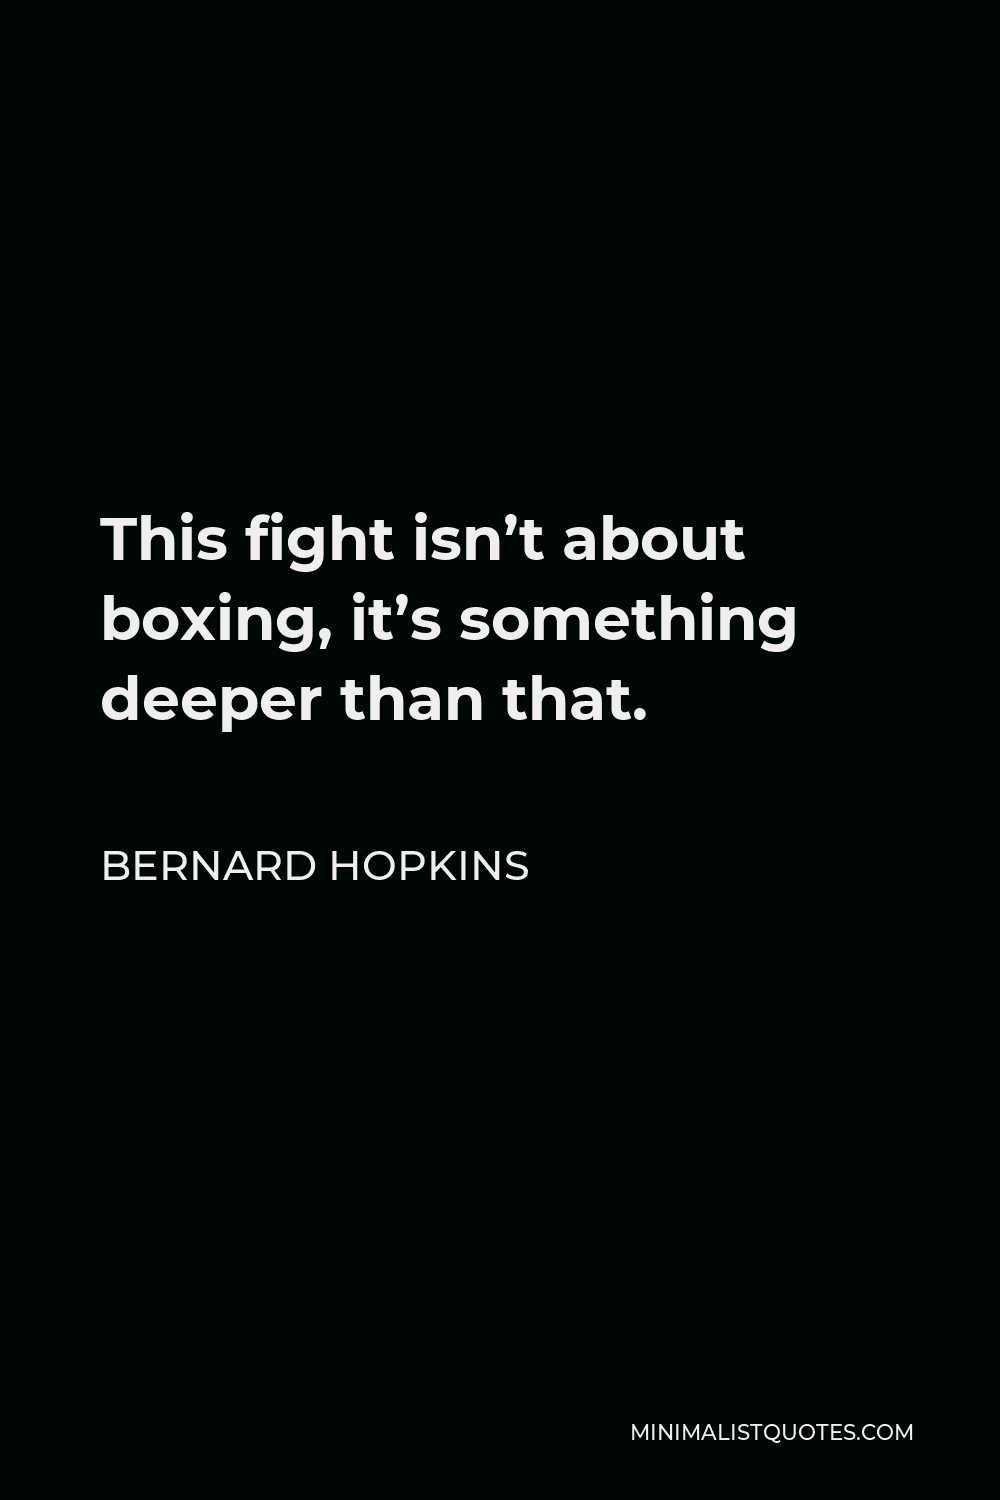 Bernard Hopkins Quote - This fight isn’t about boxing, it’s something deeper than that.